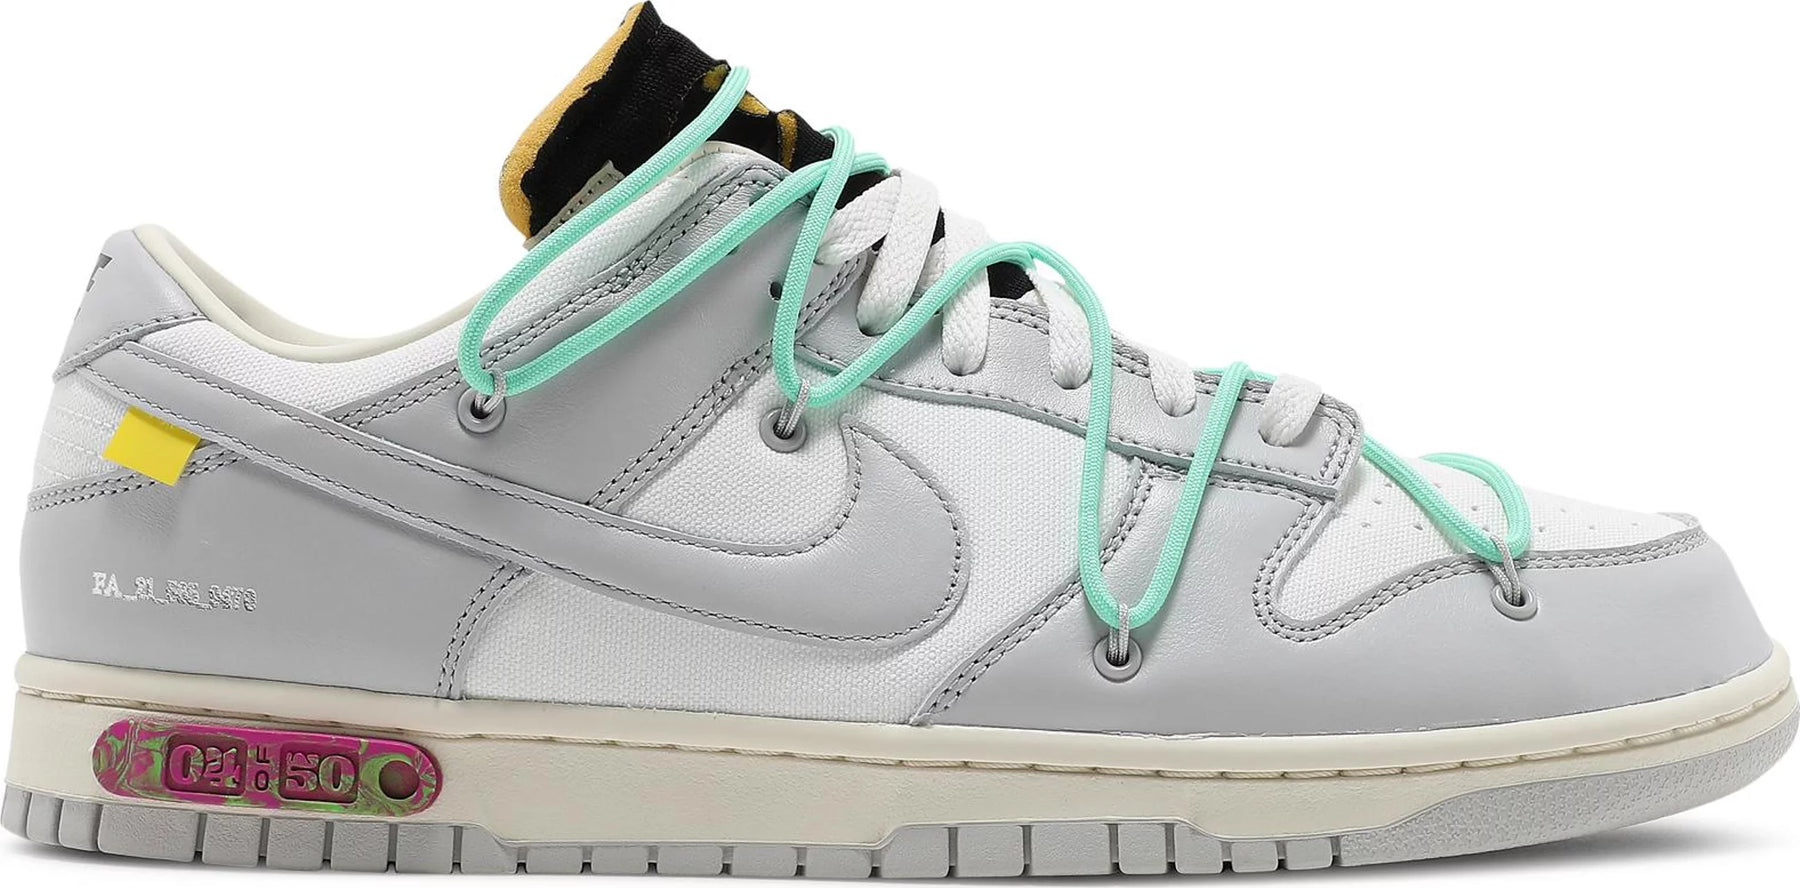 Nike Dunk Low 'Off-White Lot 4'